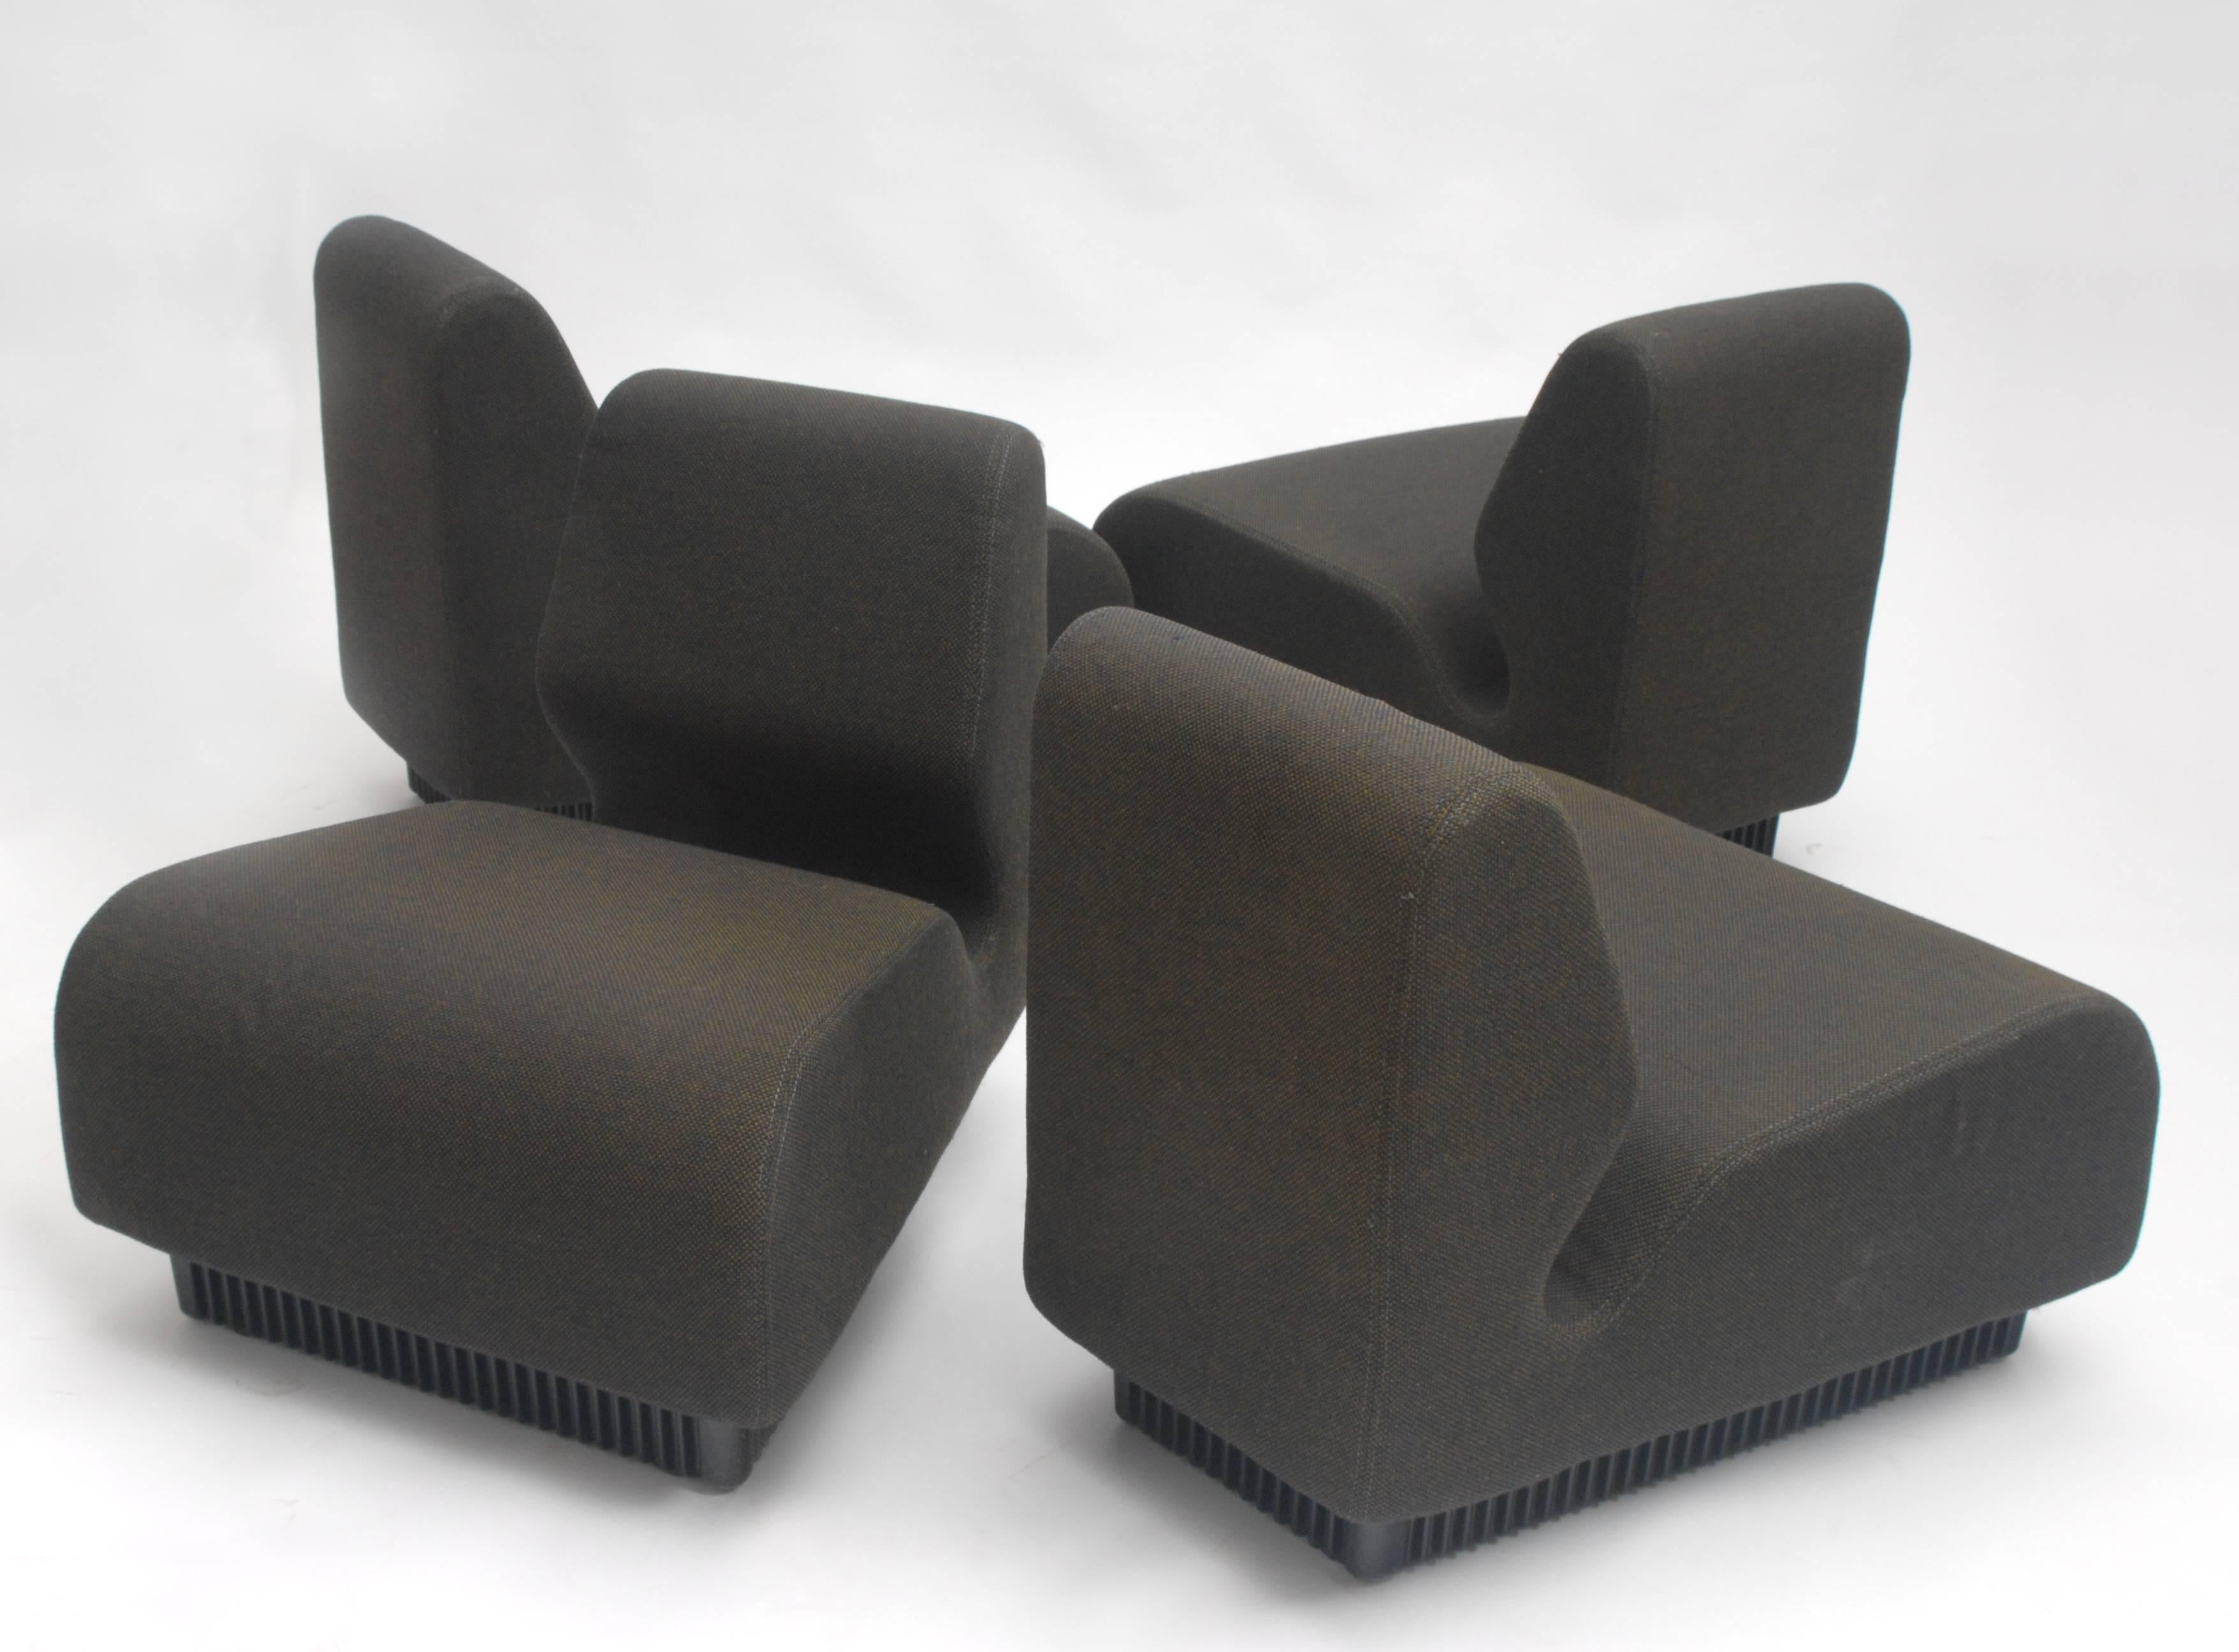 Modular sofa designed by Don Chadwick, possibility of use separately. Made by Hermann Miller.